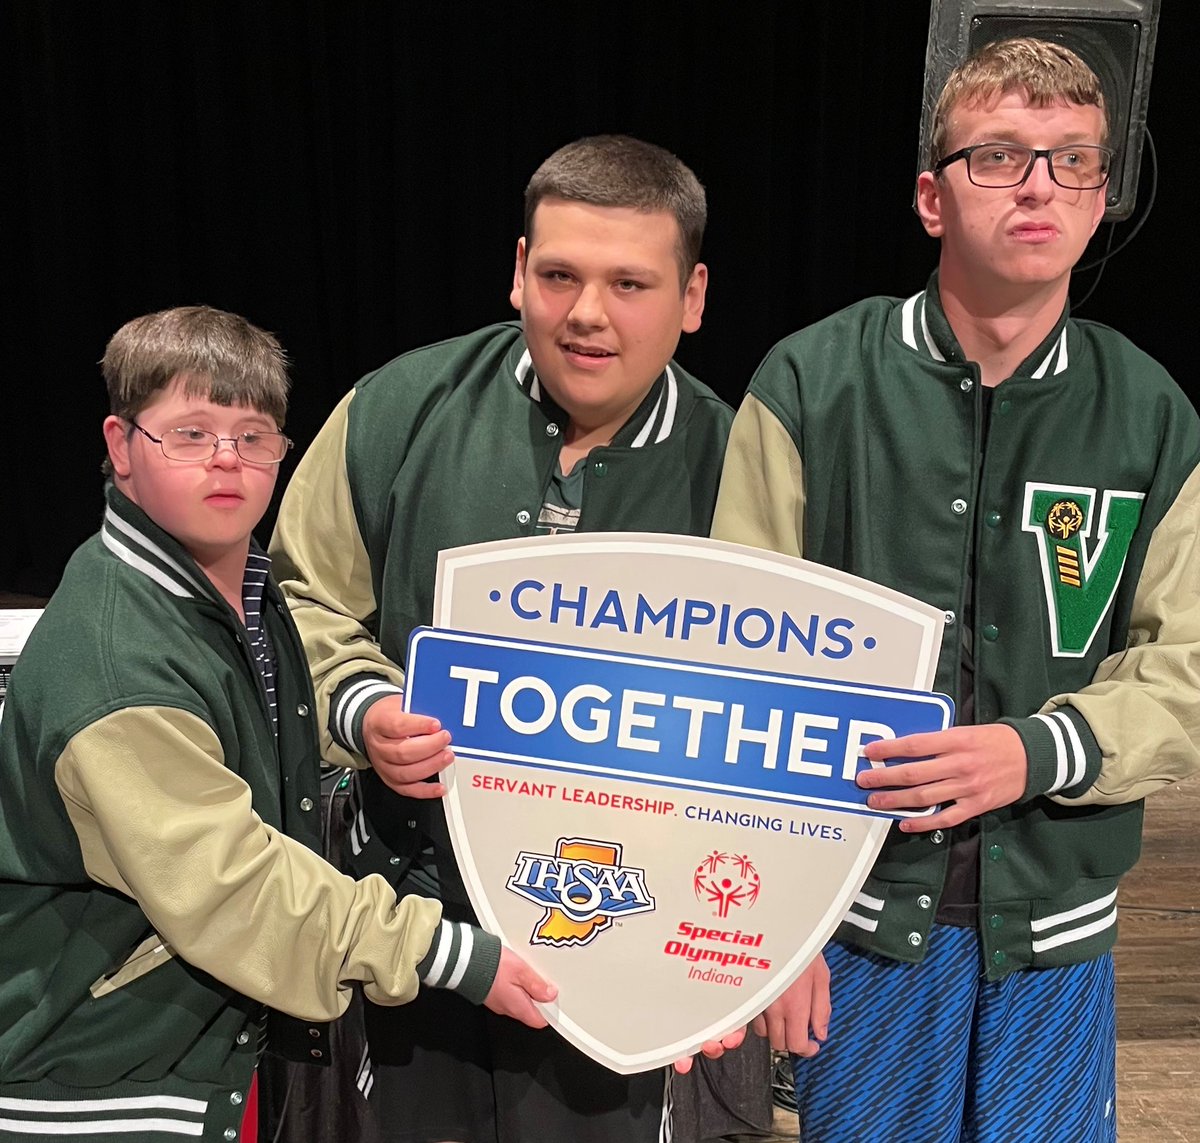 This past afternoon, a Champions Together assembly was held at Lincoln High School in Vincennes! During the assembly, LHS Athletic Director awarded letter jackets to three members of their Unified Alices team! Congratulations Alices!